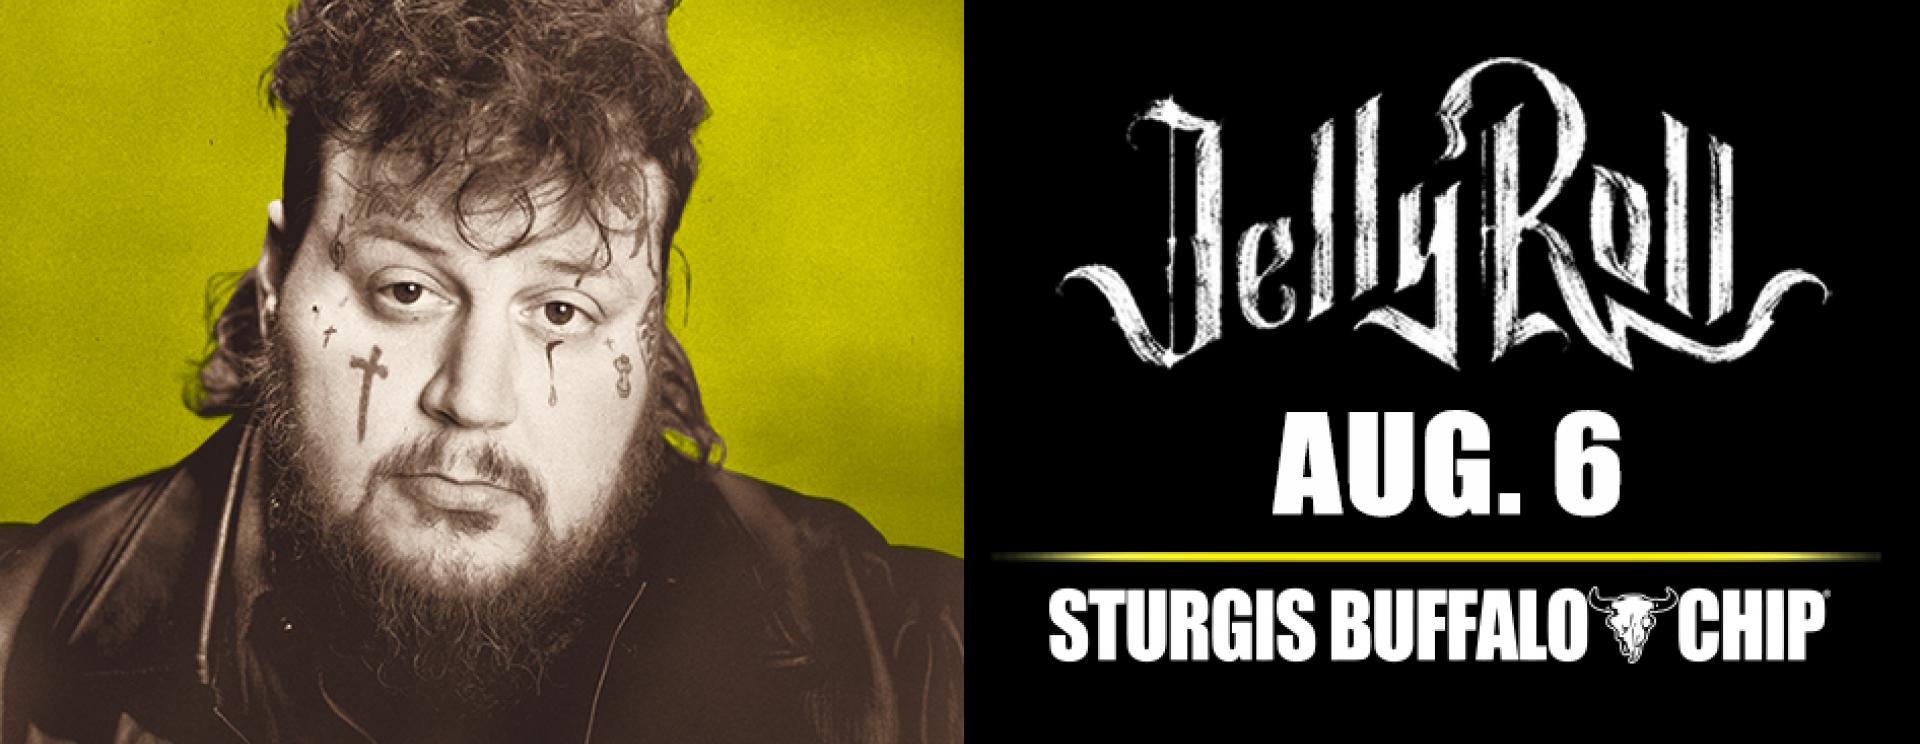 Jelly Roll at the Sturgis Buffalo Chip